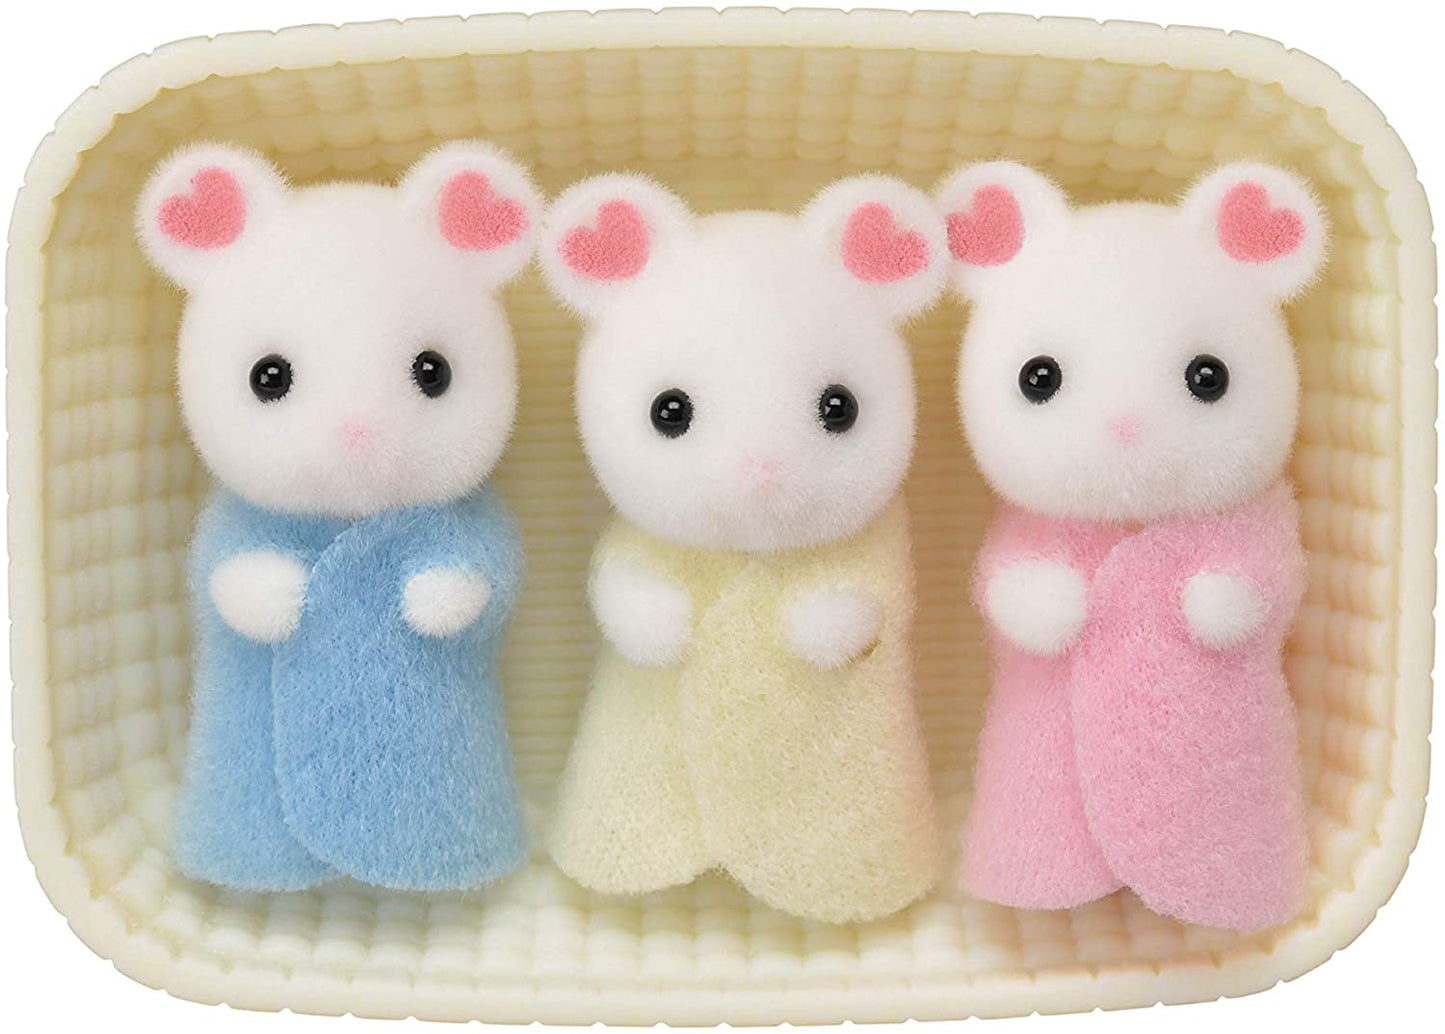 Calico Critters - Marshmallow Triplets